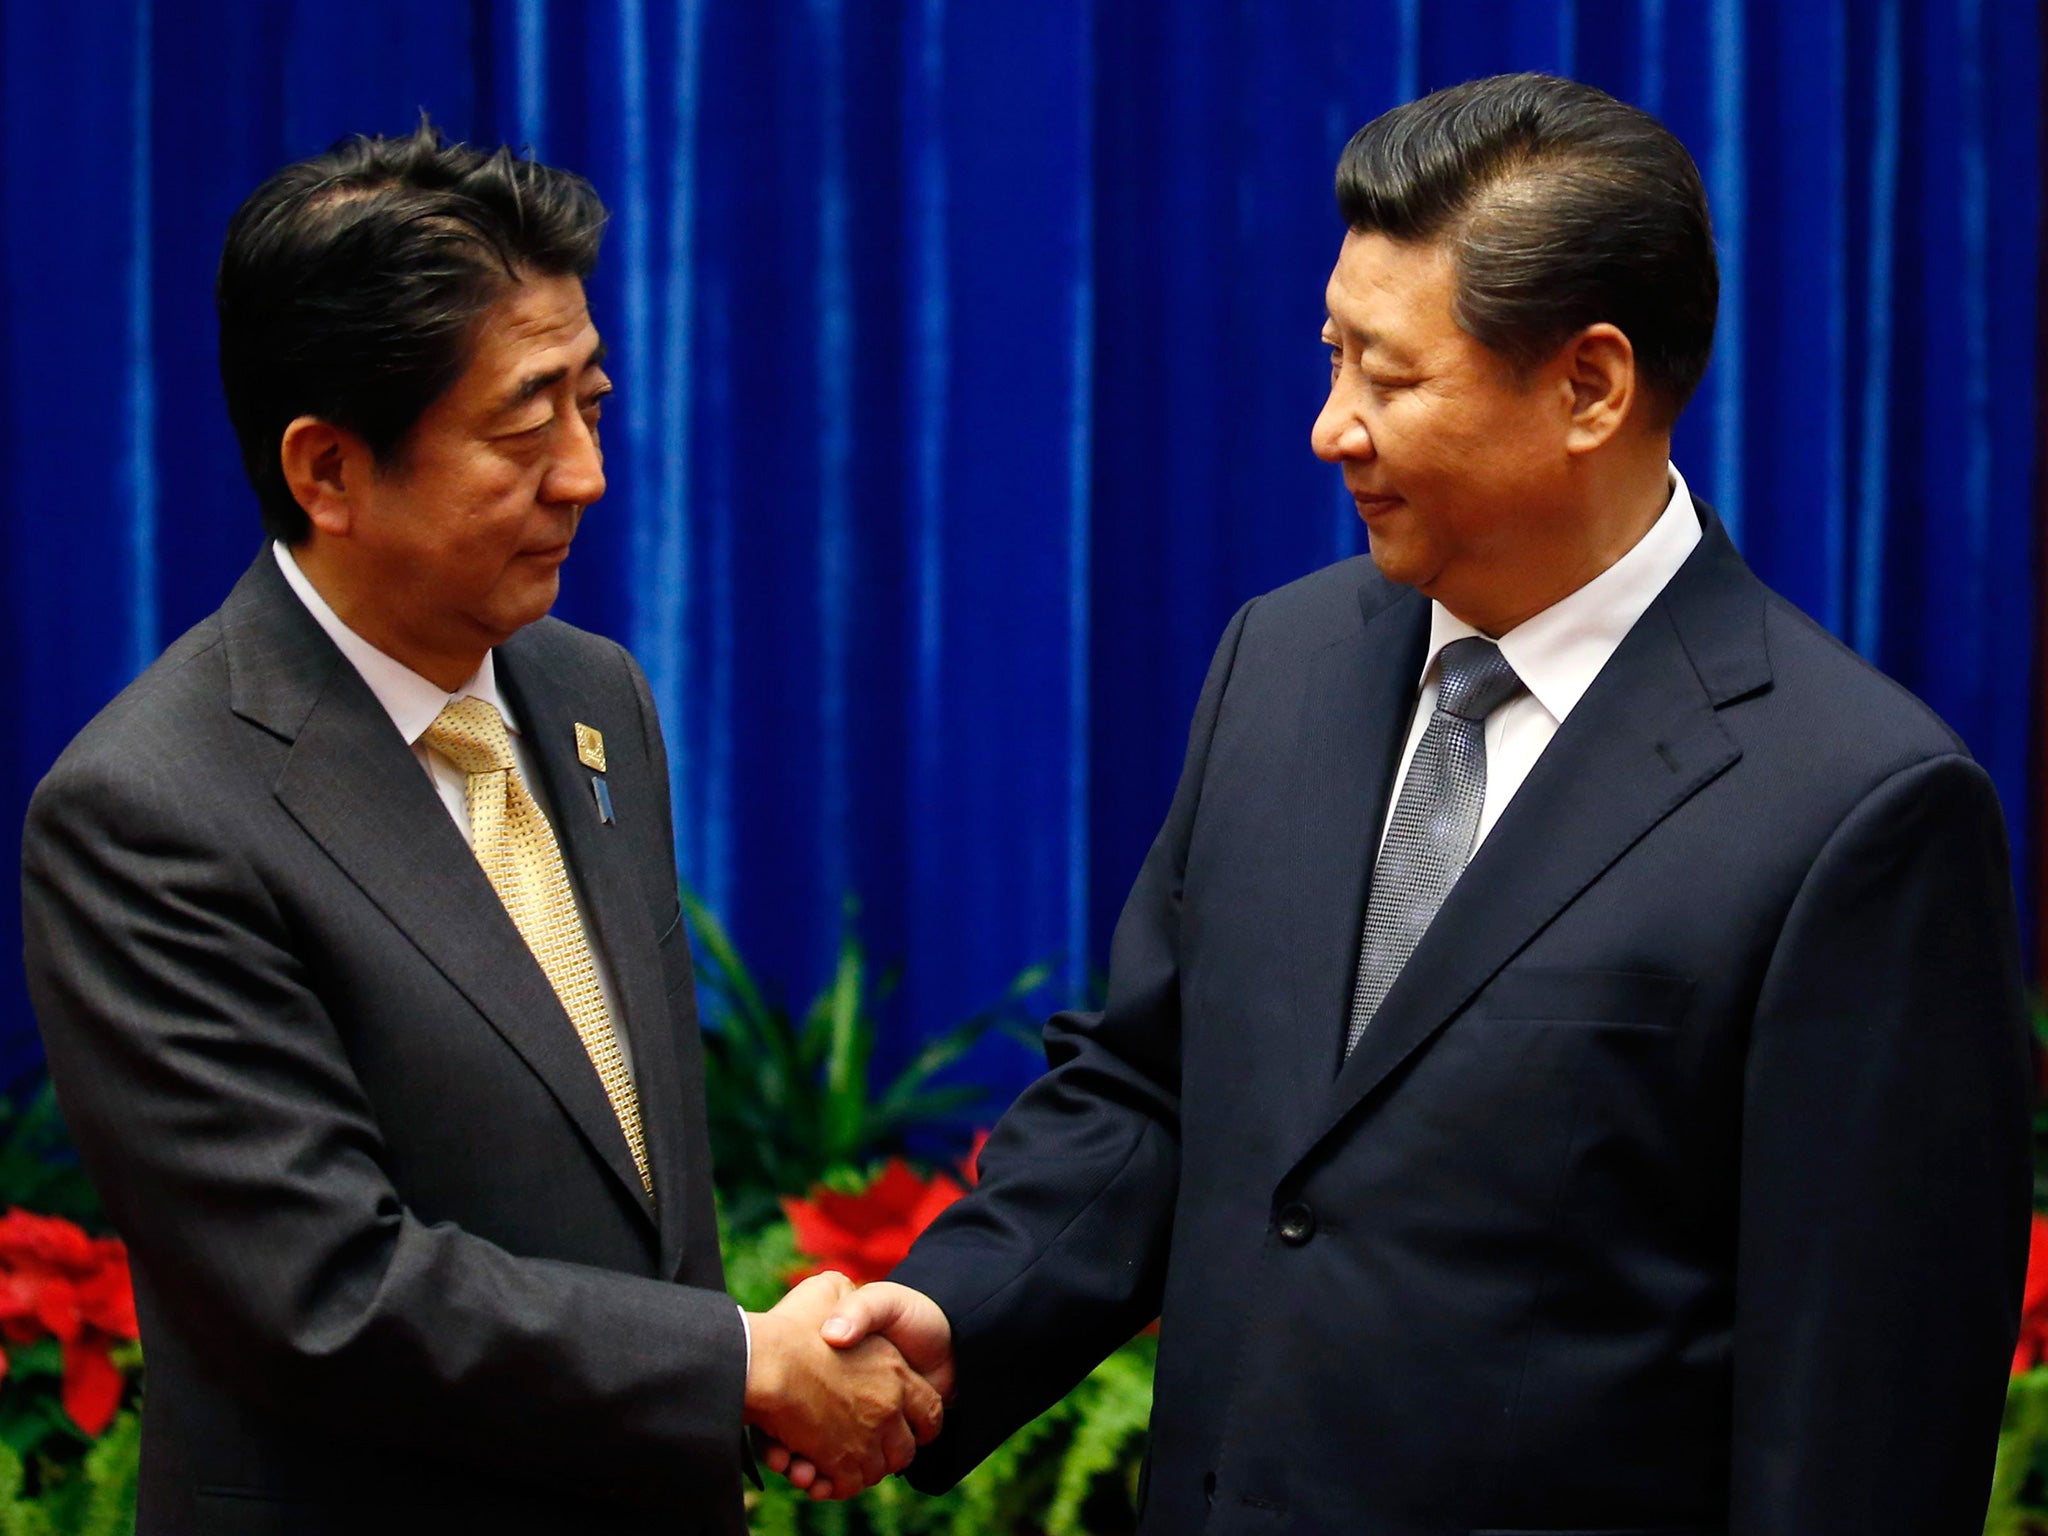 President Xi Jinping of China and Prime Minister Shinzo Abe of Japan shake hands